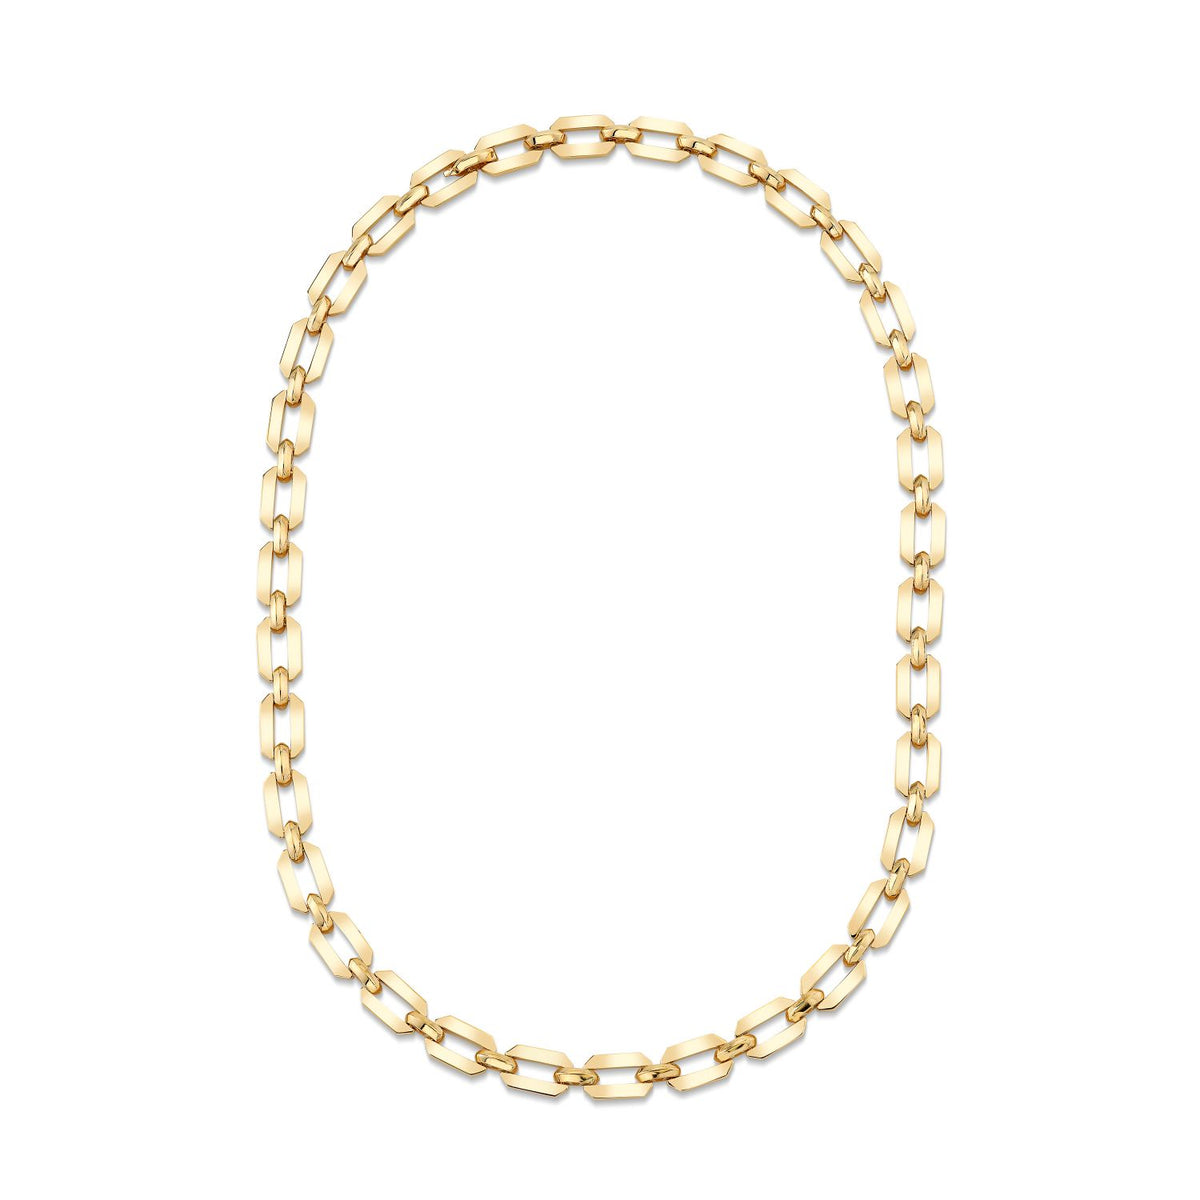 READY TO SHIP SOLID GOLD FLAT GEO LINK NECKLACE